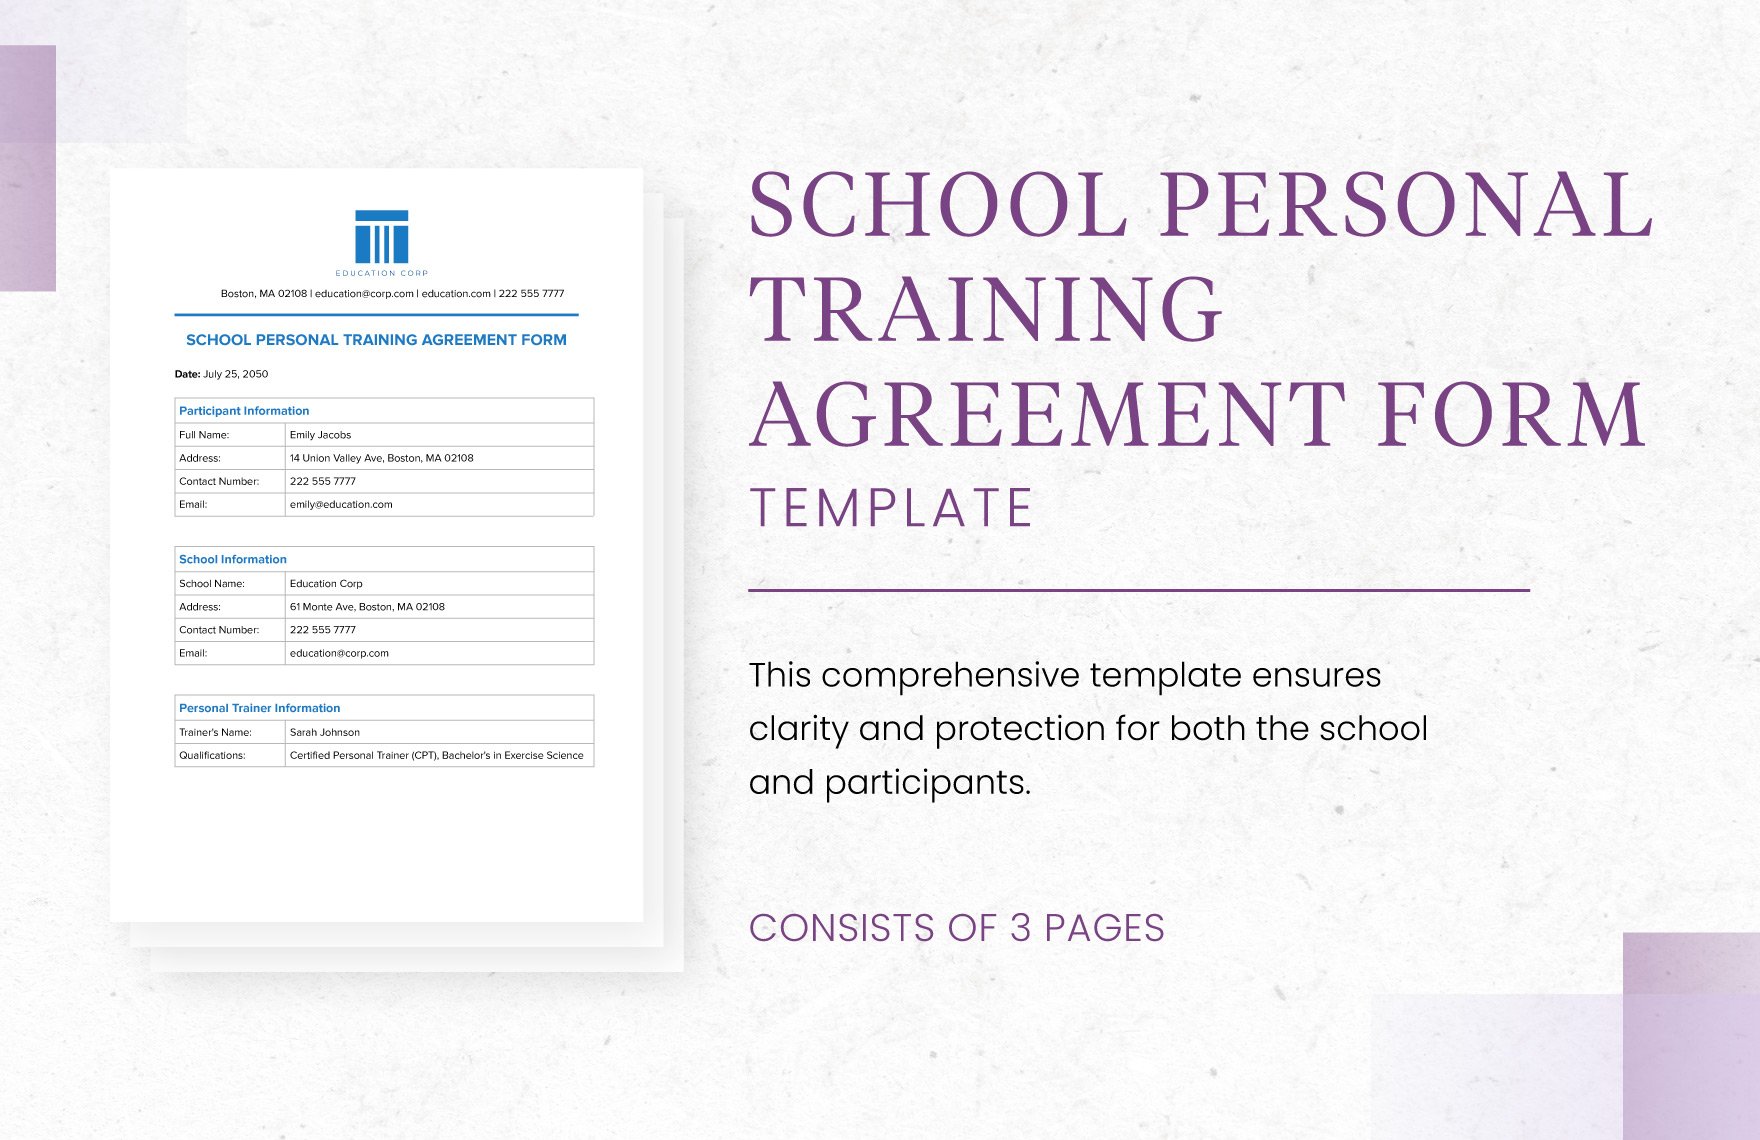 School Personal Training Agreement Form Template